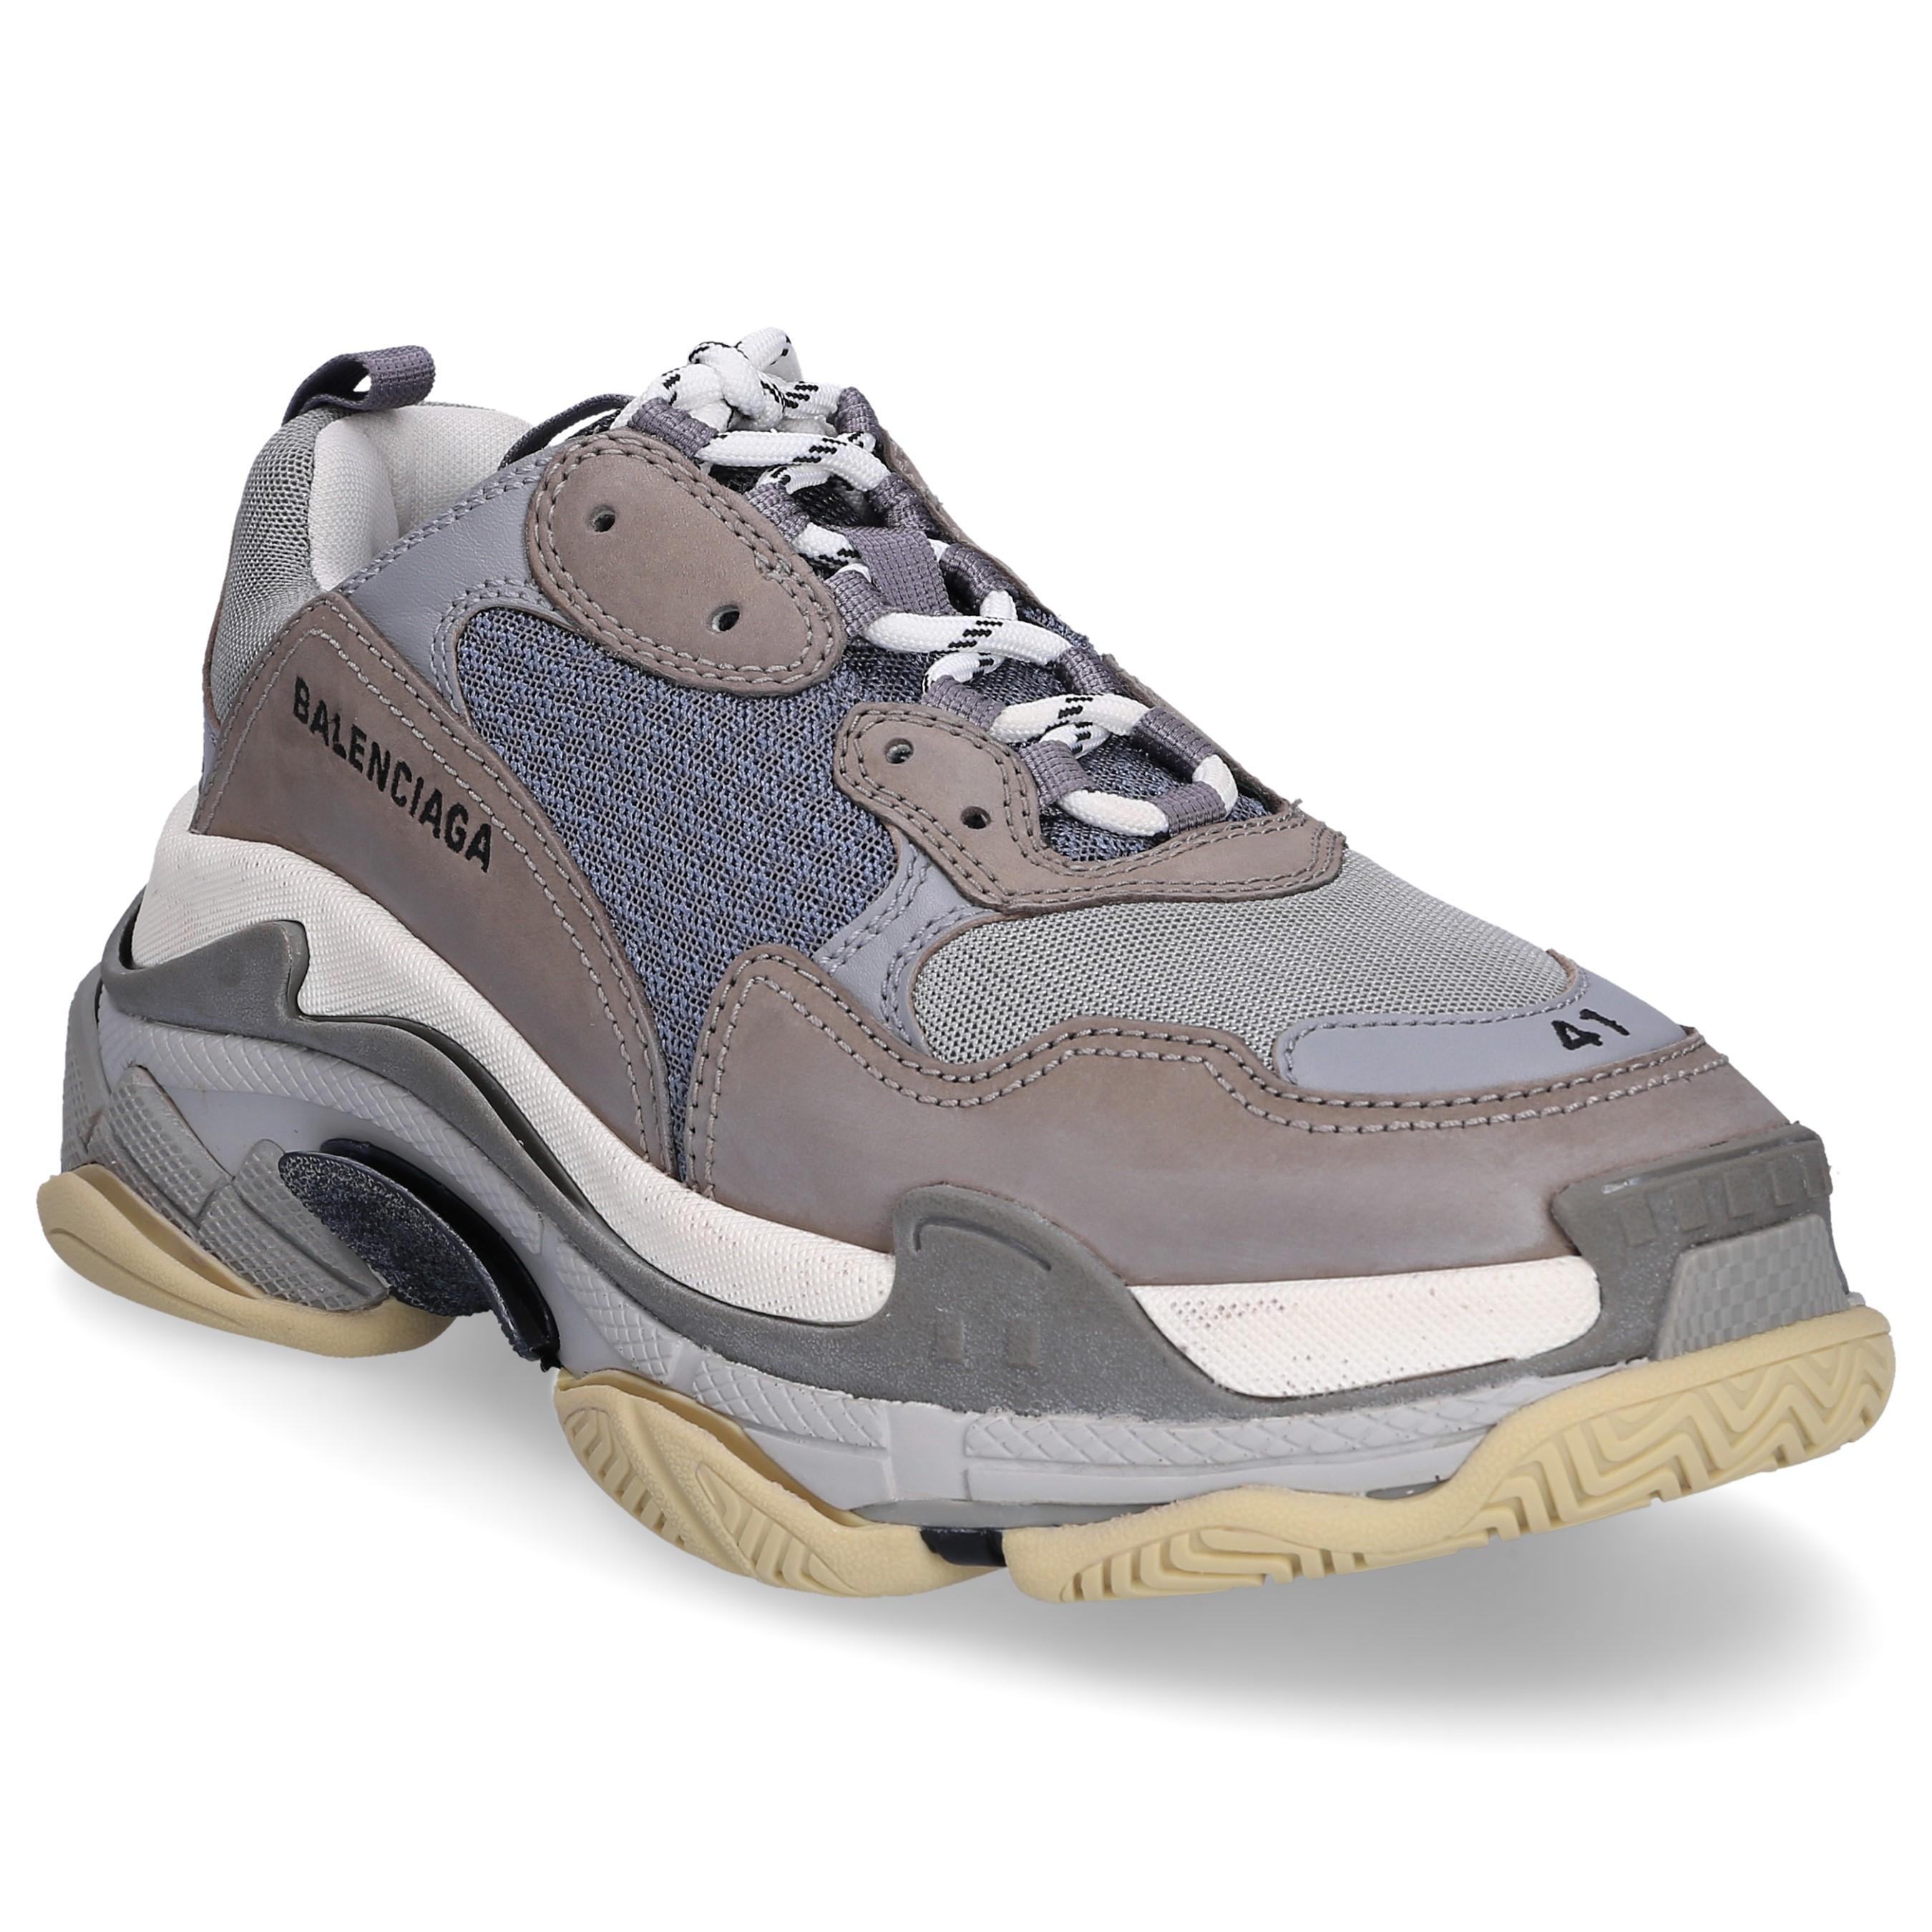 How to get New Balenciaga Triple S Trainers Sliver Pinterest